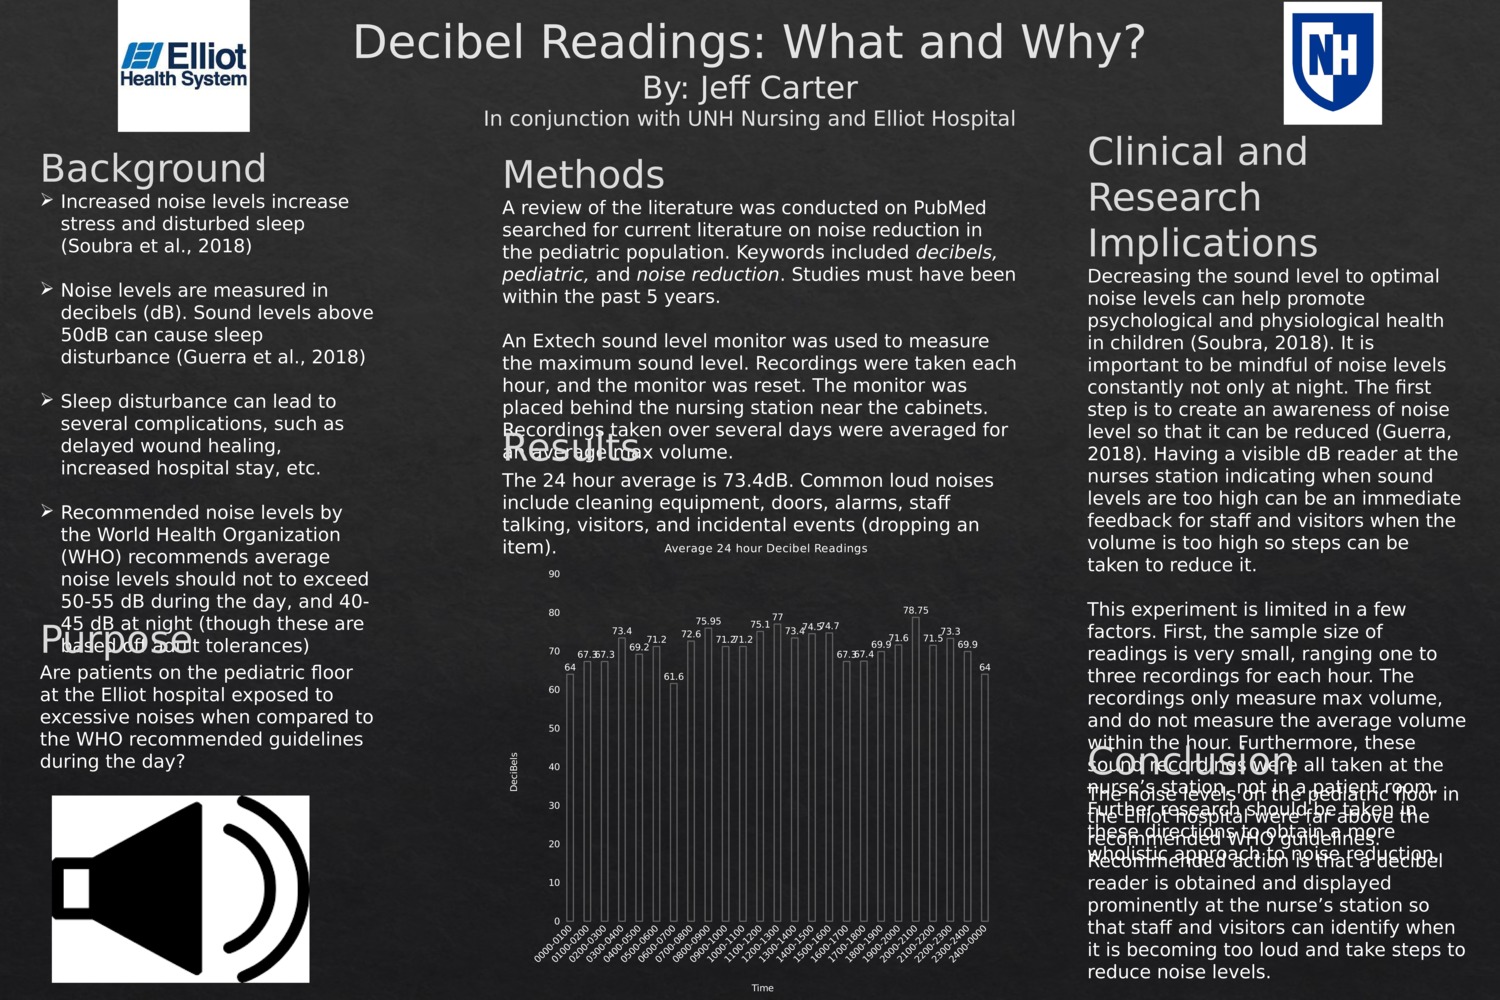 Decibel Readings: What And Why? by jic1000